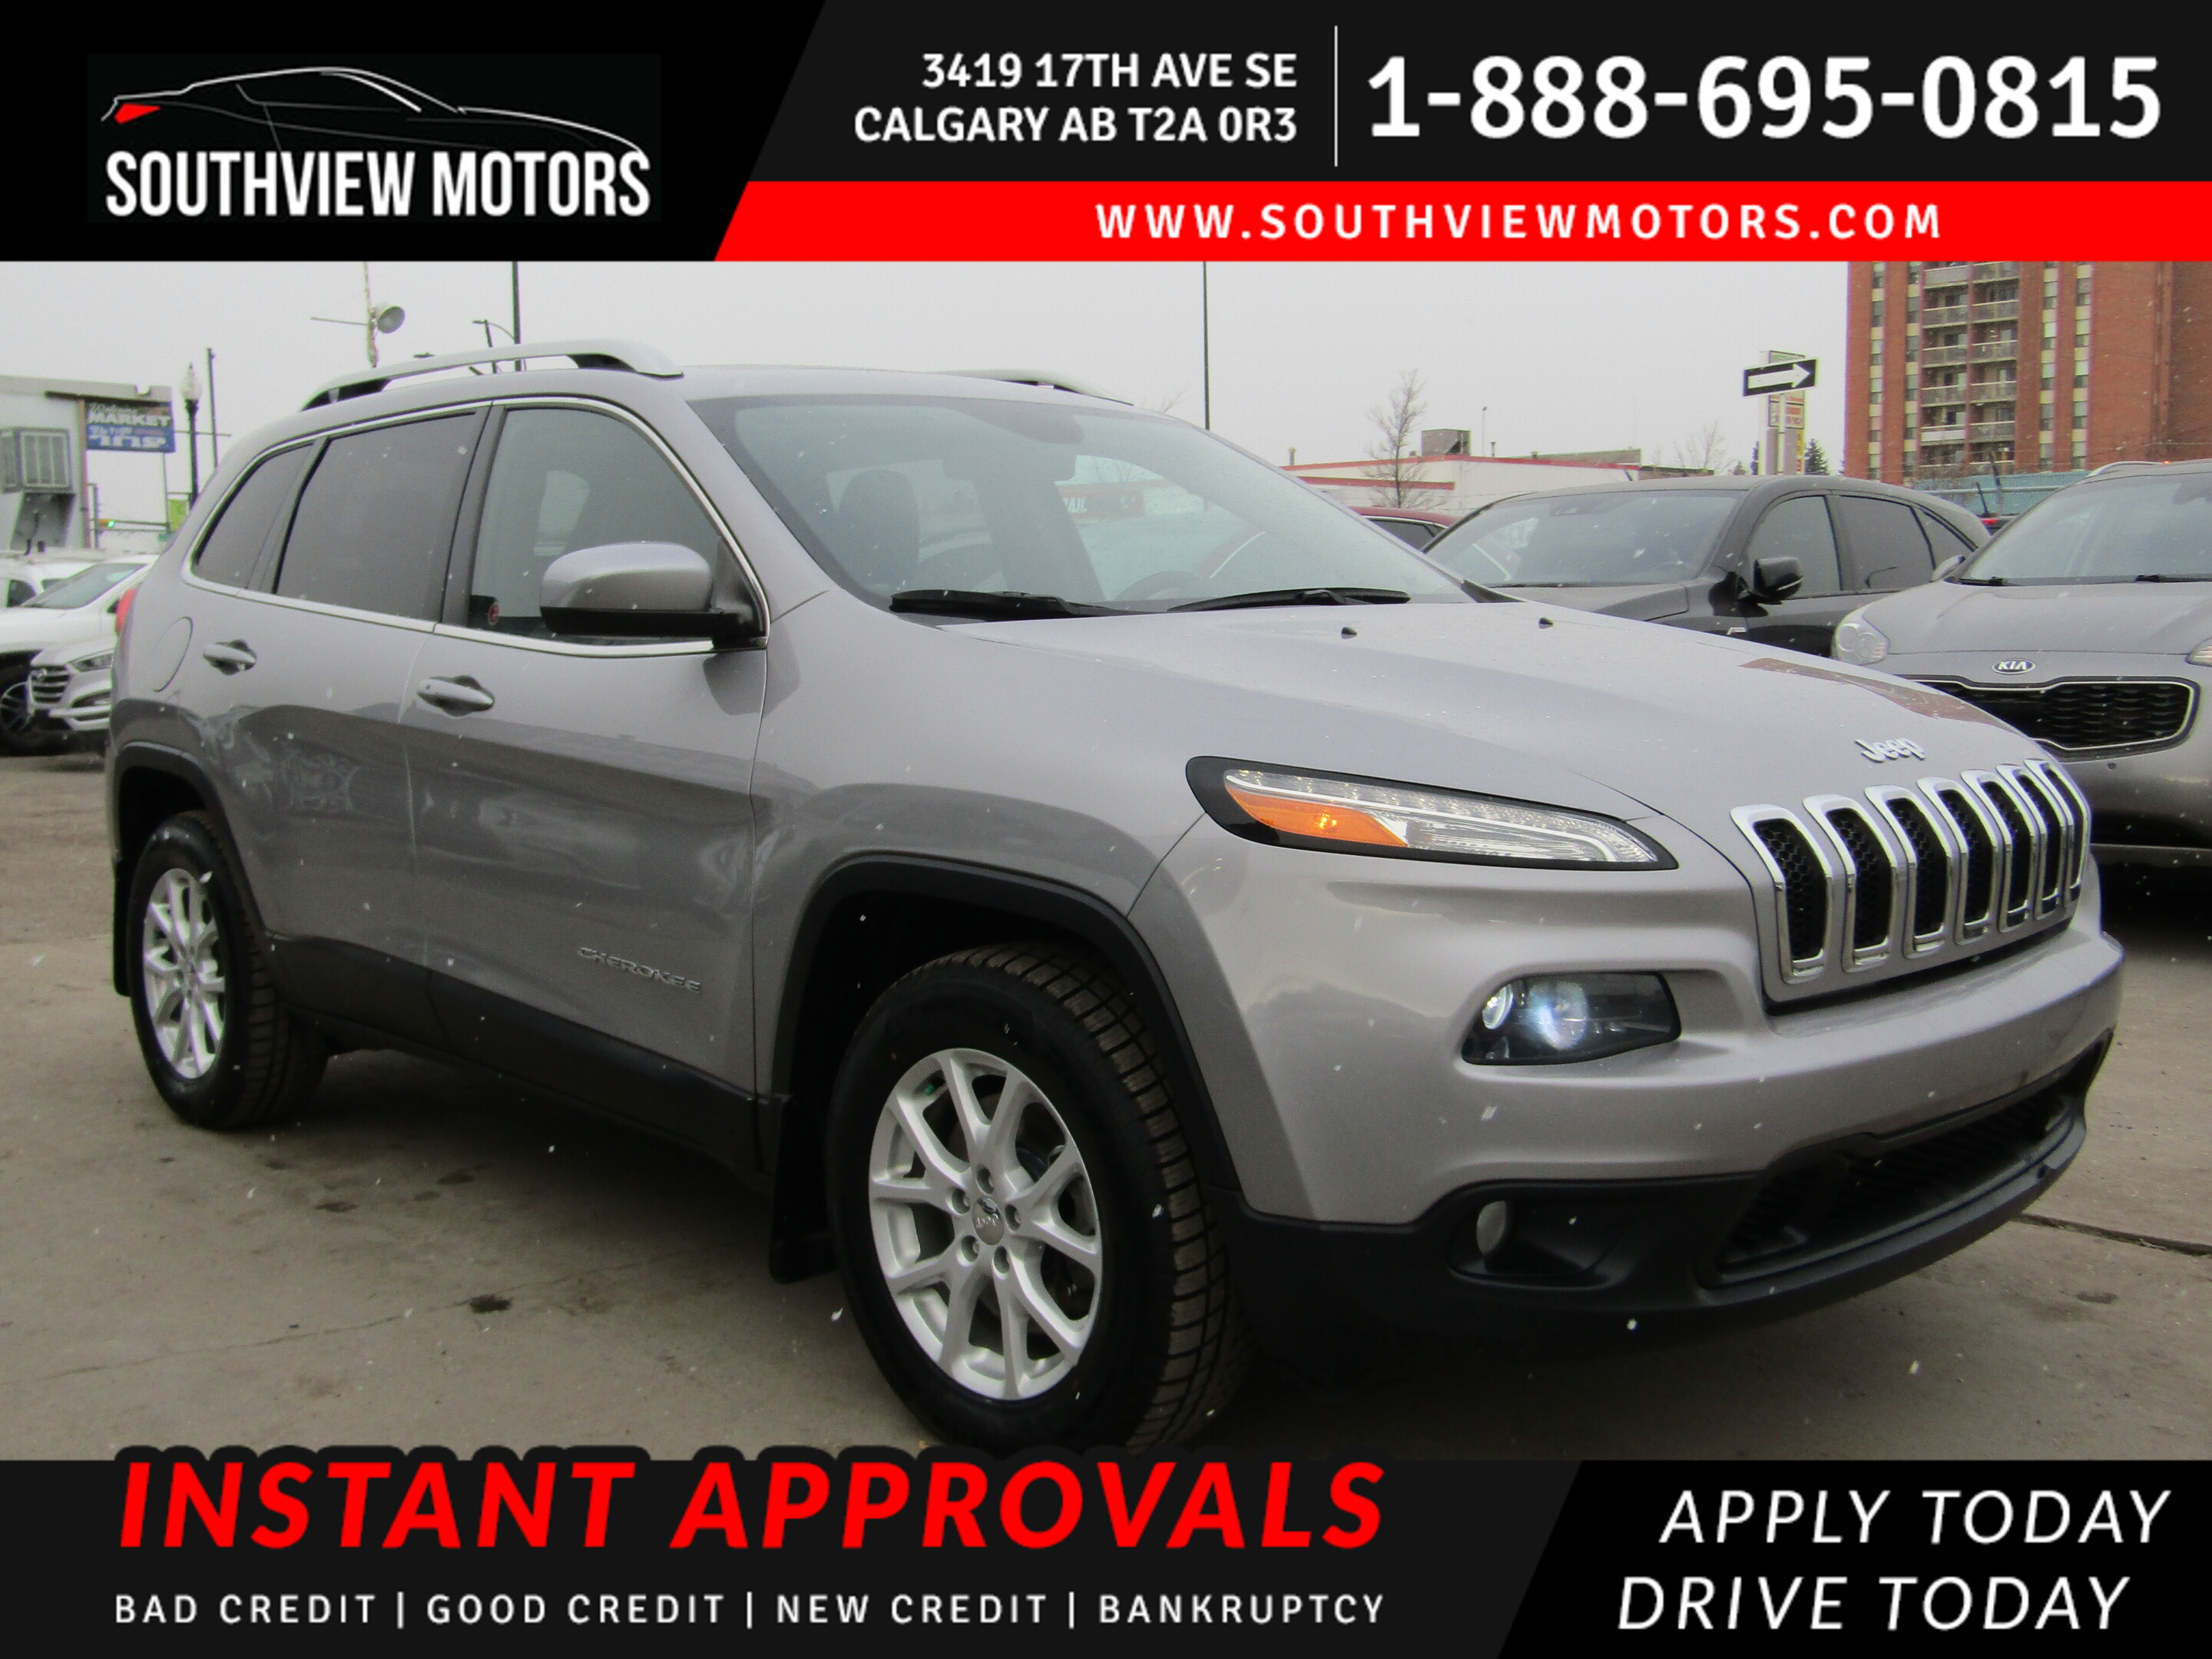 2018 Jeep Cherokee NORTH 4x4 V6 LEATHER/B.CAMERA/PANOROOF/NEW TIRES